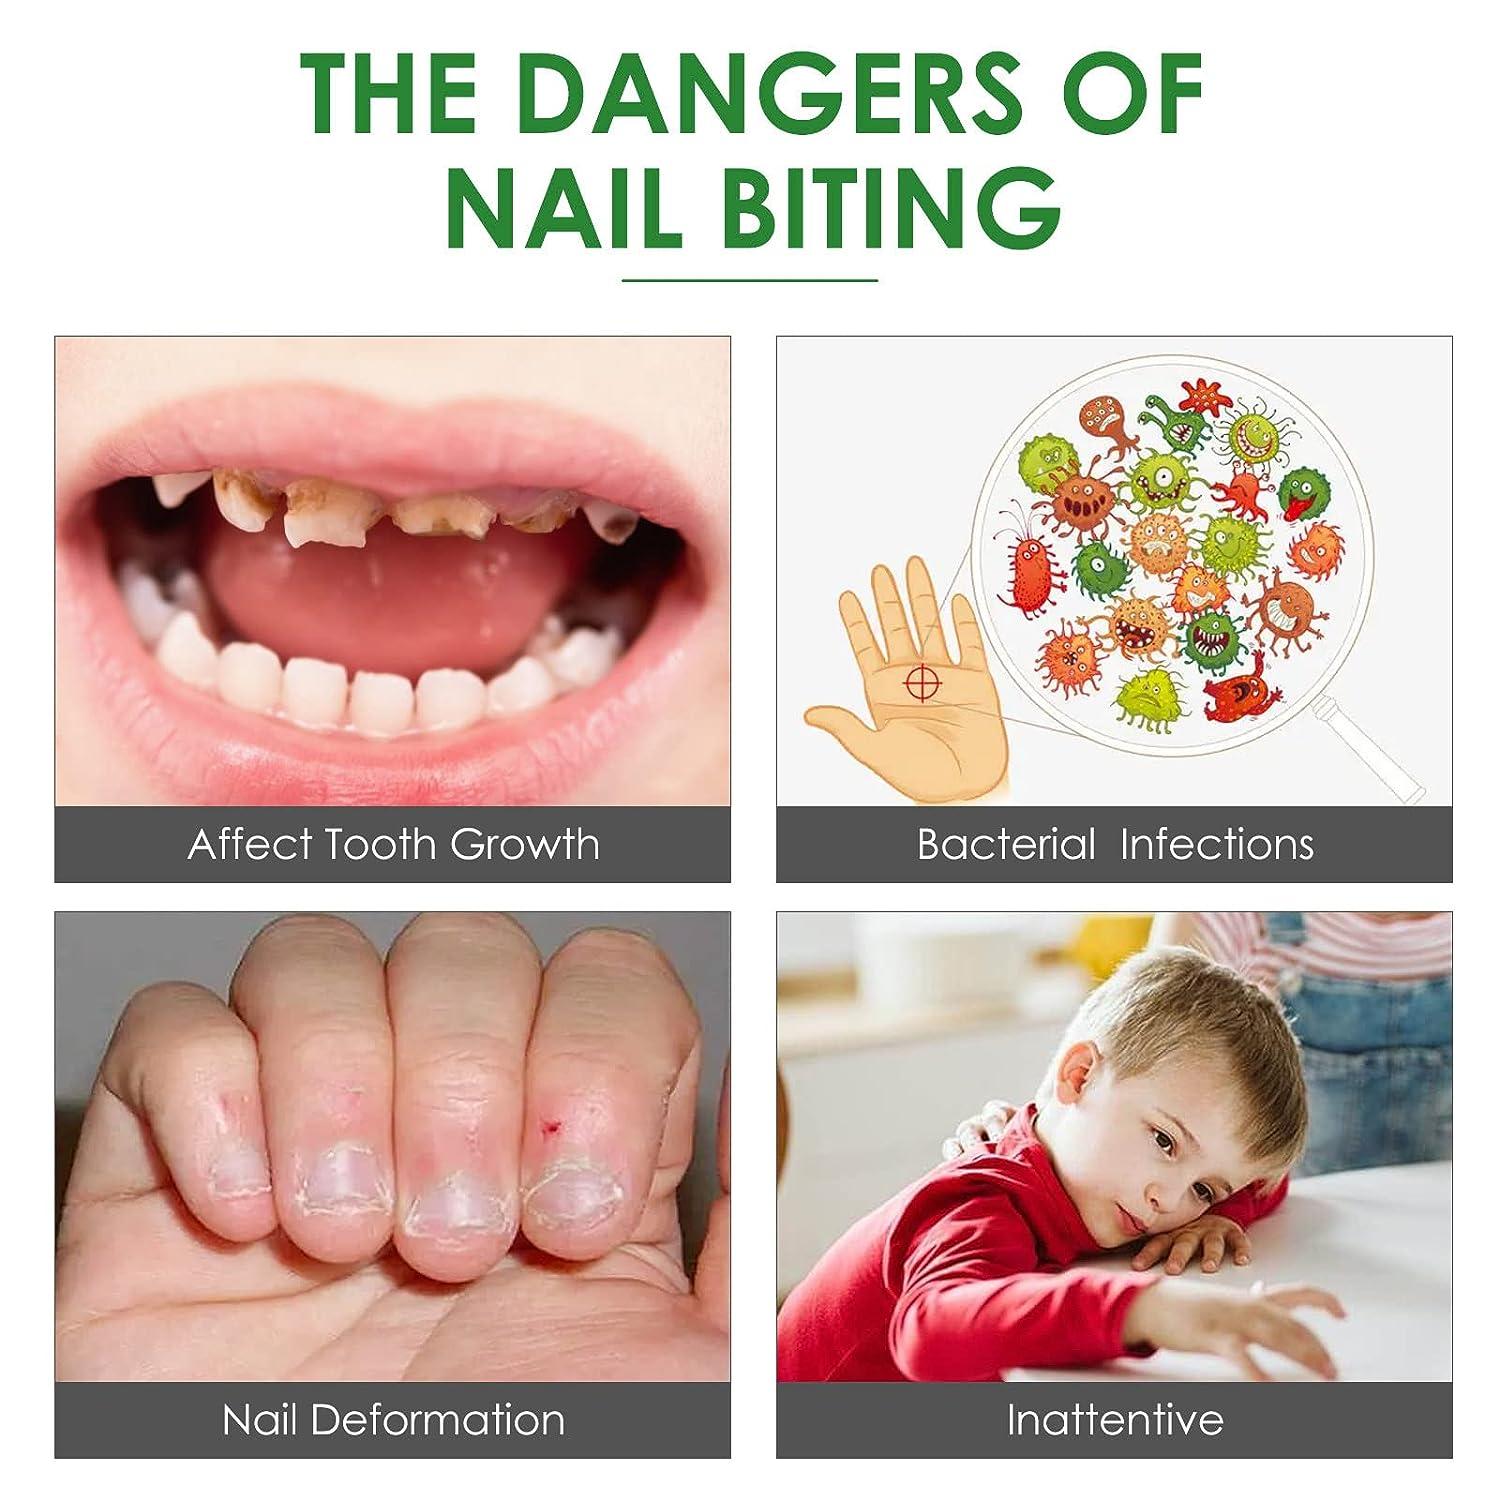 How to Stop Biting Your Nails - The New York Times